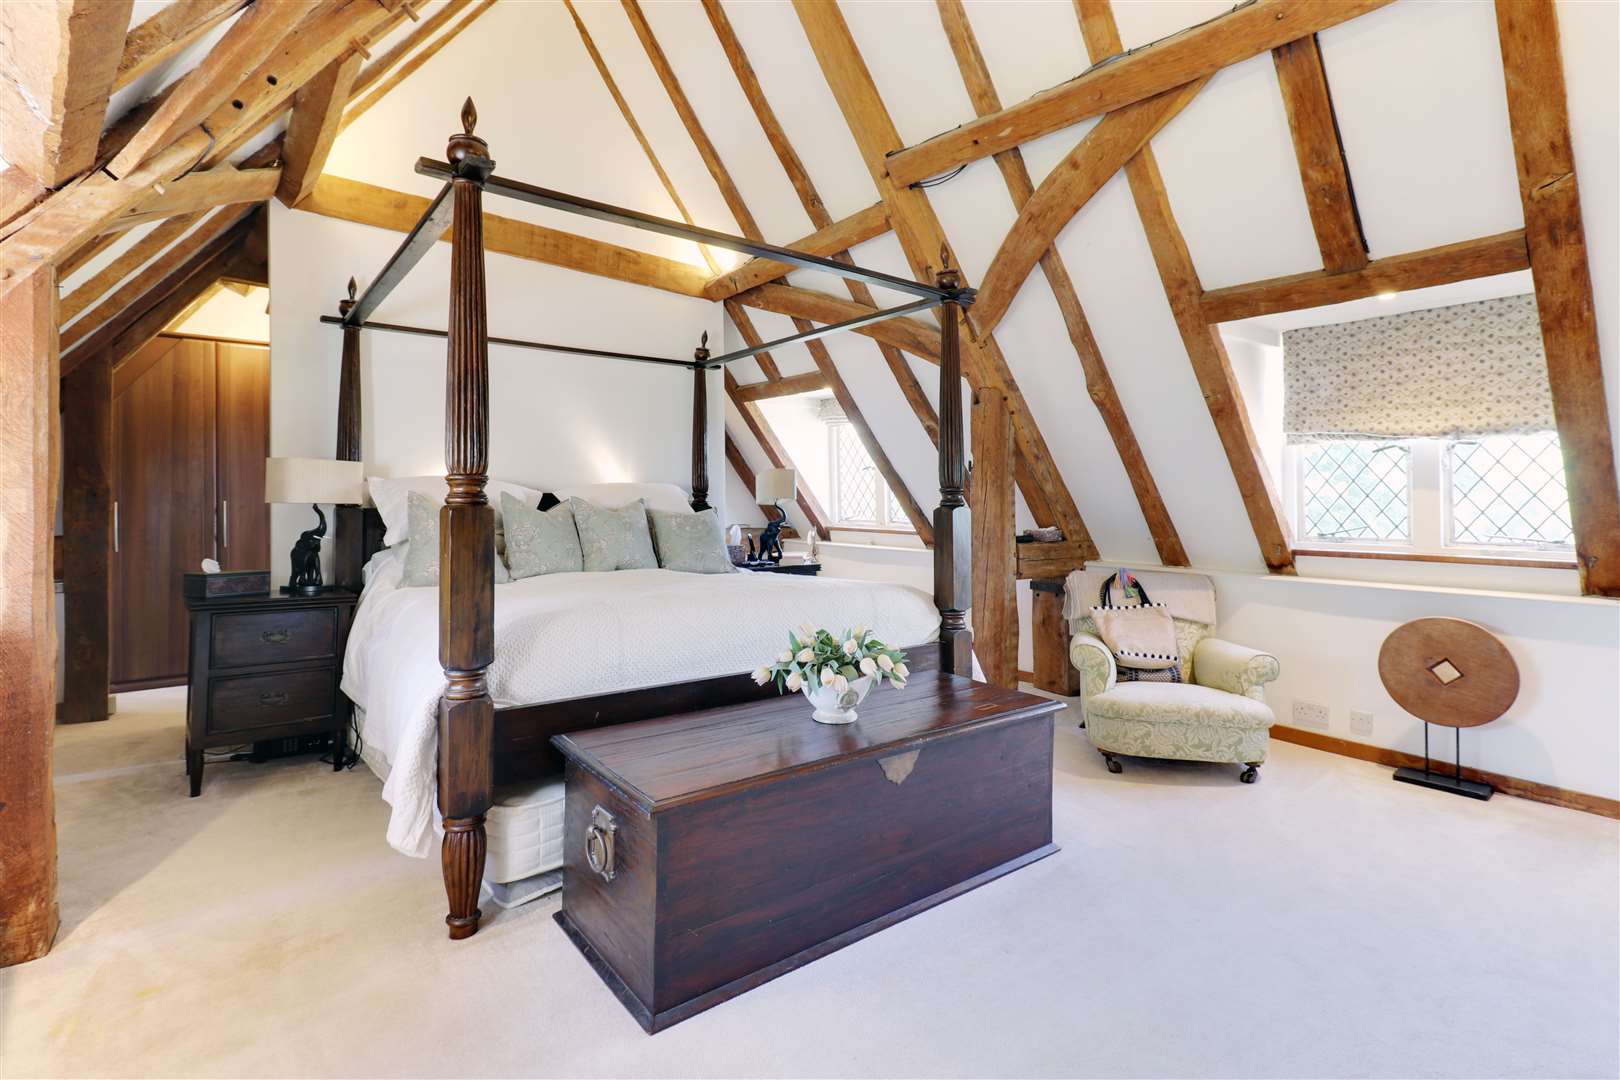 The house is full of original 16th century timber and traditional features. Picture: Savills